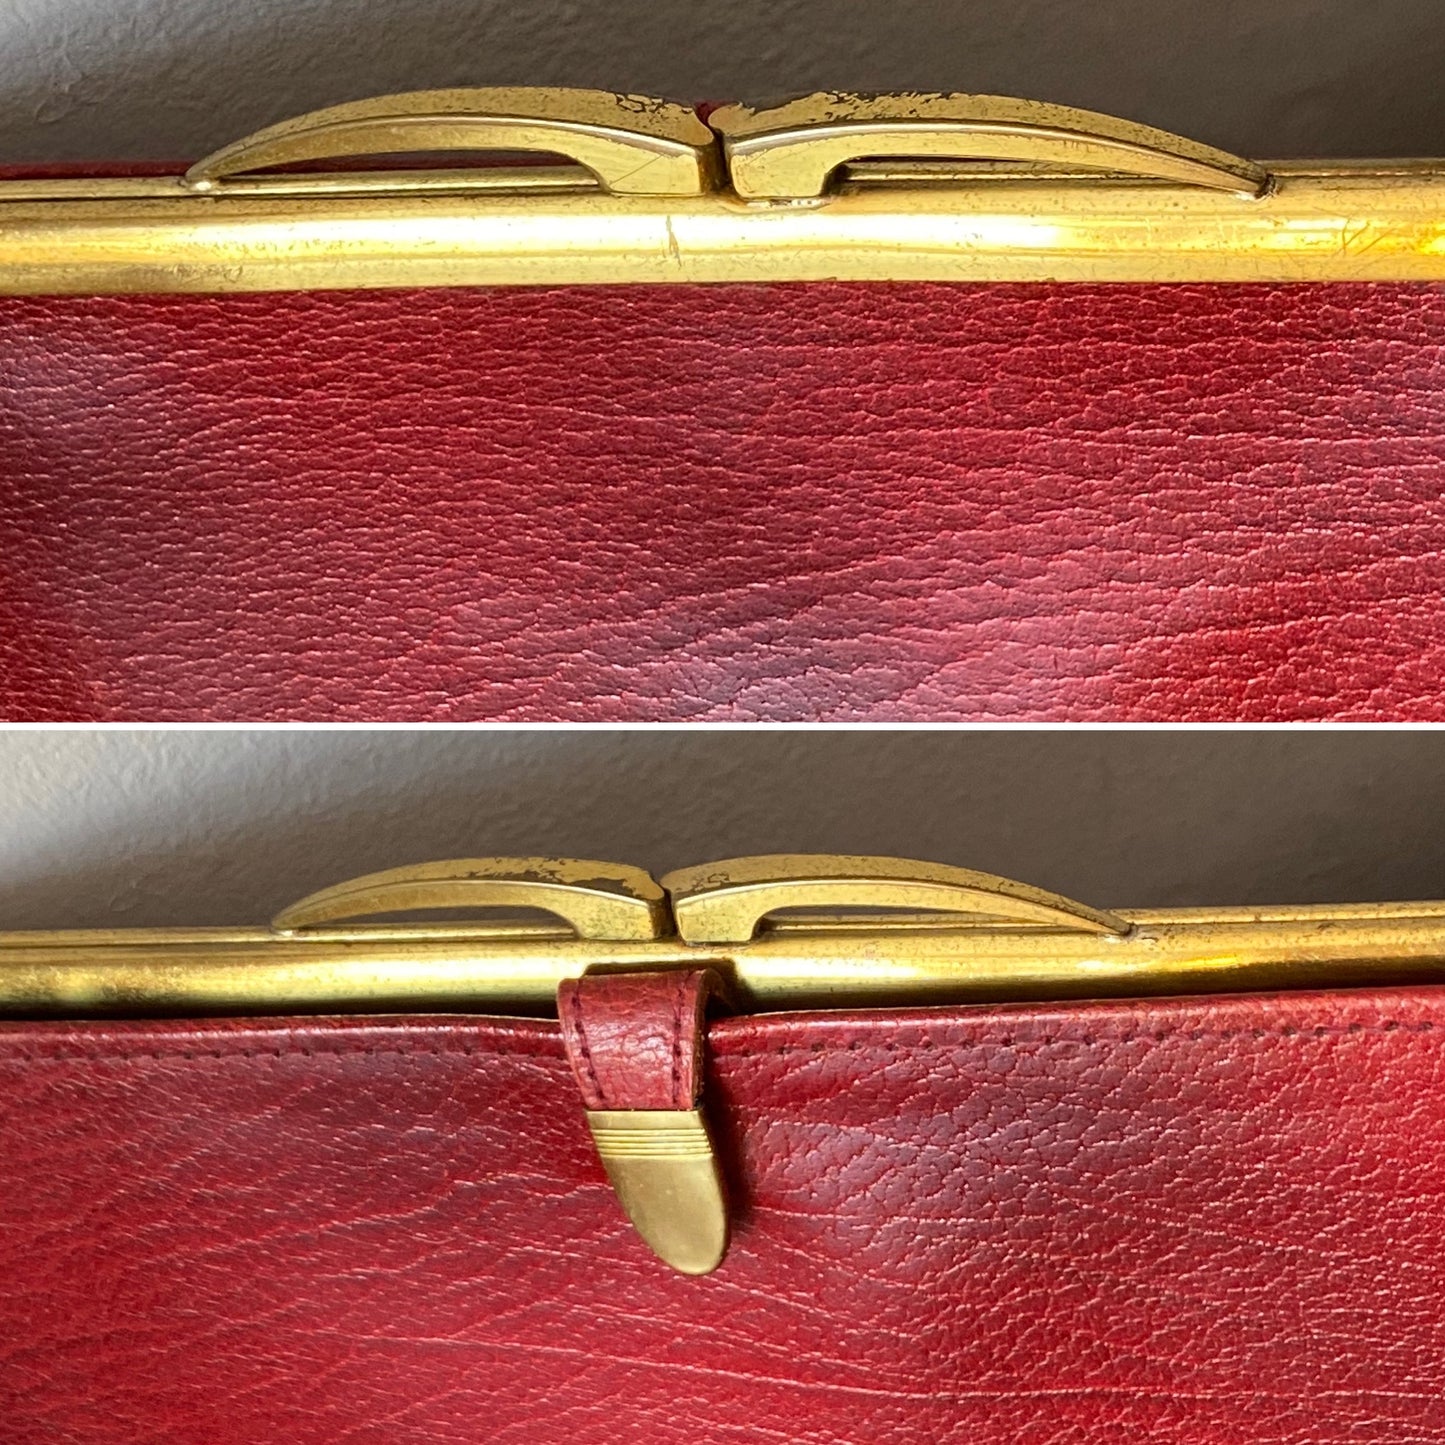 Vintage dark red leather purse with a kiss lock closure